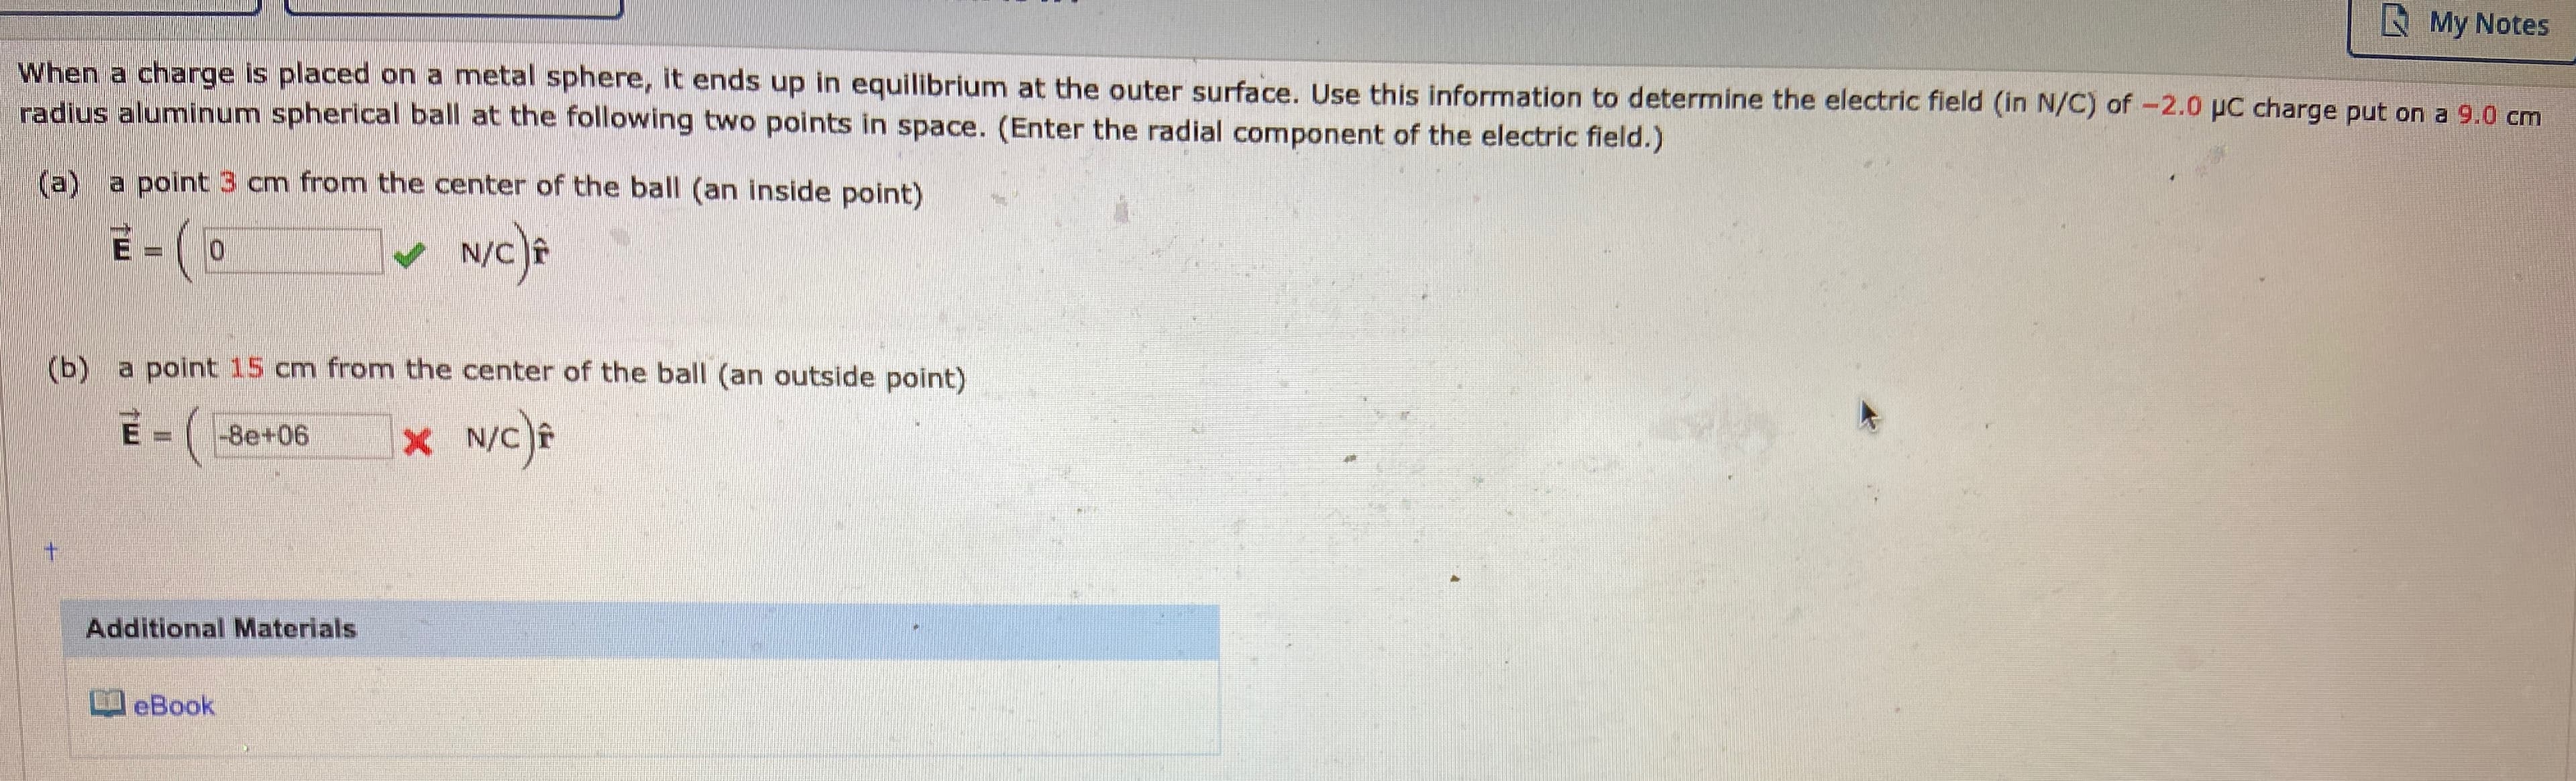 N My Notes
When a charge is placed on a metal sphere, it ends up in equilibrium at the outer surface. Use this information to determine the electric field (in N/C) of -2.0 pC charge put on a 9.0 cm
radius aluminum spherical ball at the following two points in space. (Enter the radial component of the electric field.)
(a) a point 3 cm from the center of the ball (an inside point)
N/c)f
(b) a point 15 cm from the center of the ball (an outside point)
-8e+06
%3D
Additional Materials
eBook
m.
